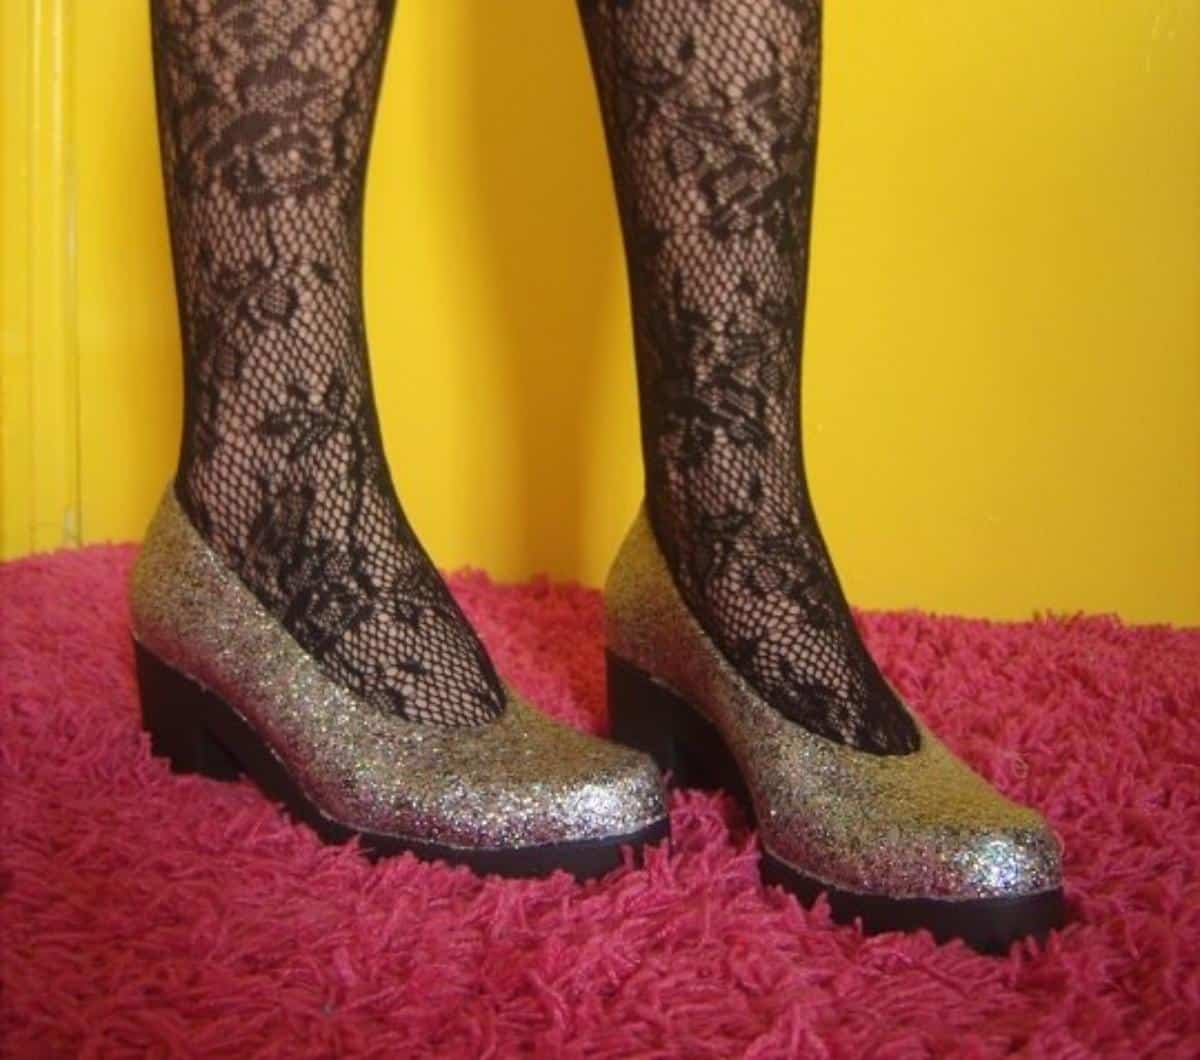 Anthro Inspired Glitter Shoes